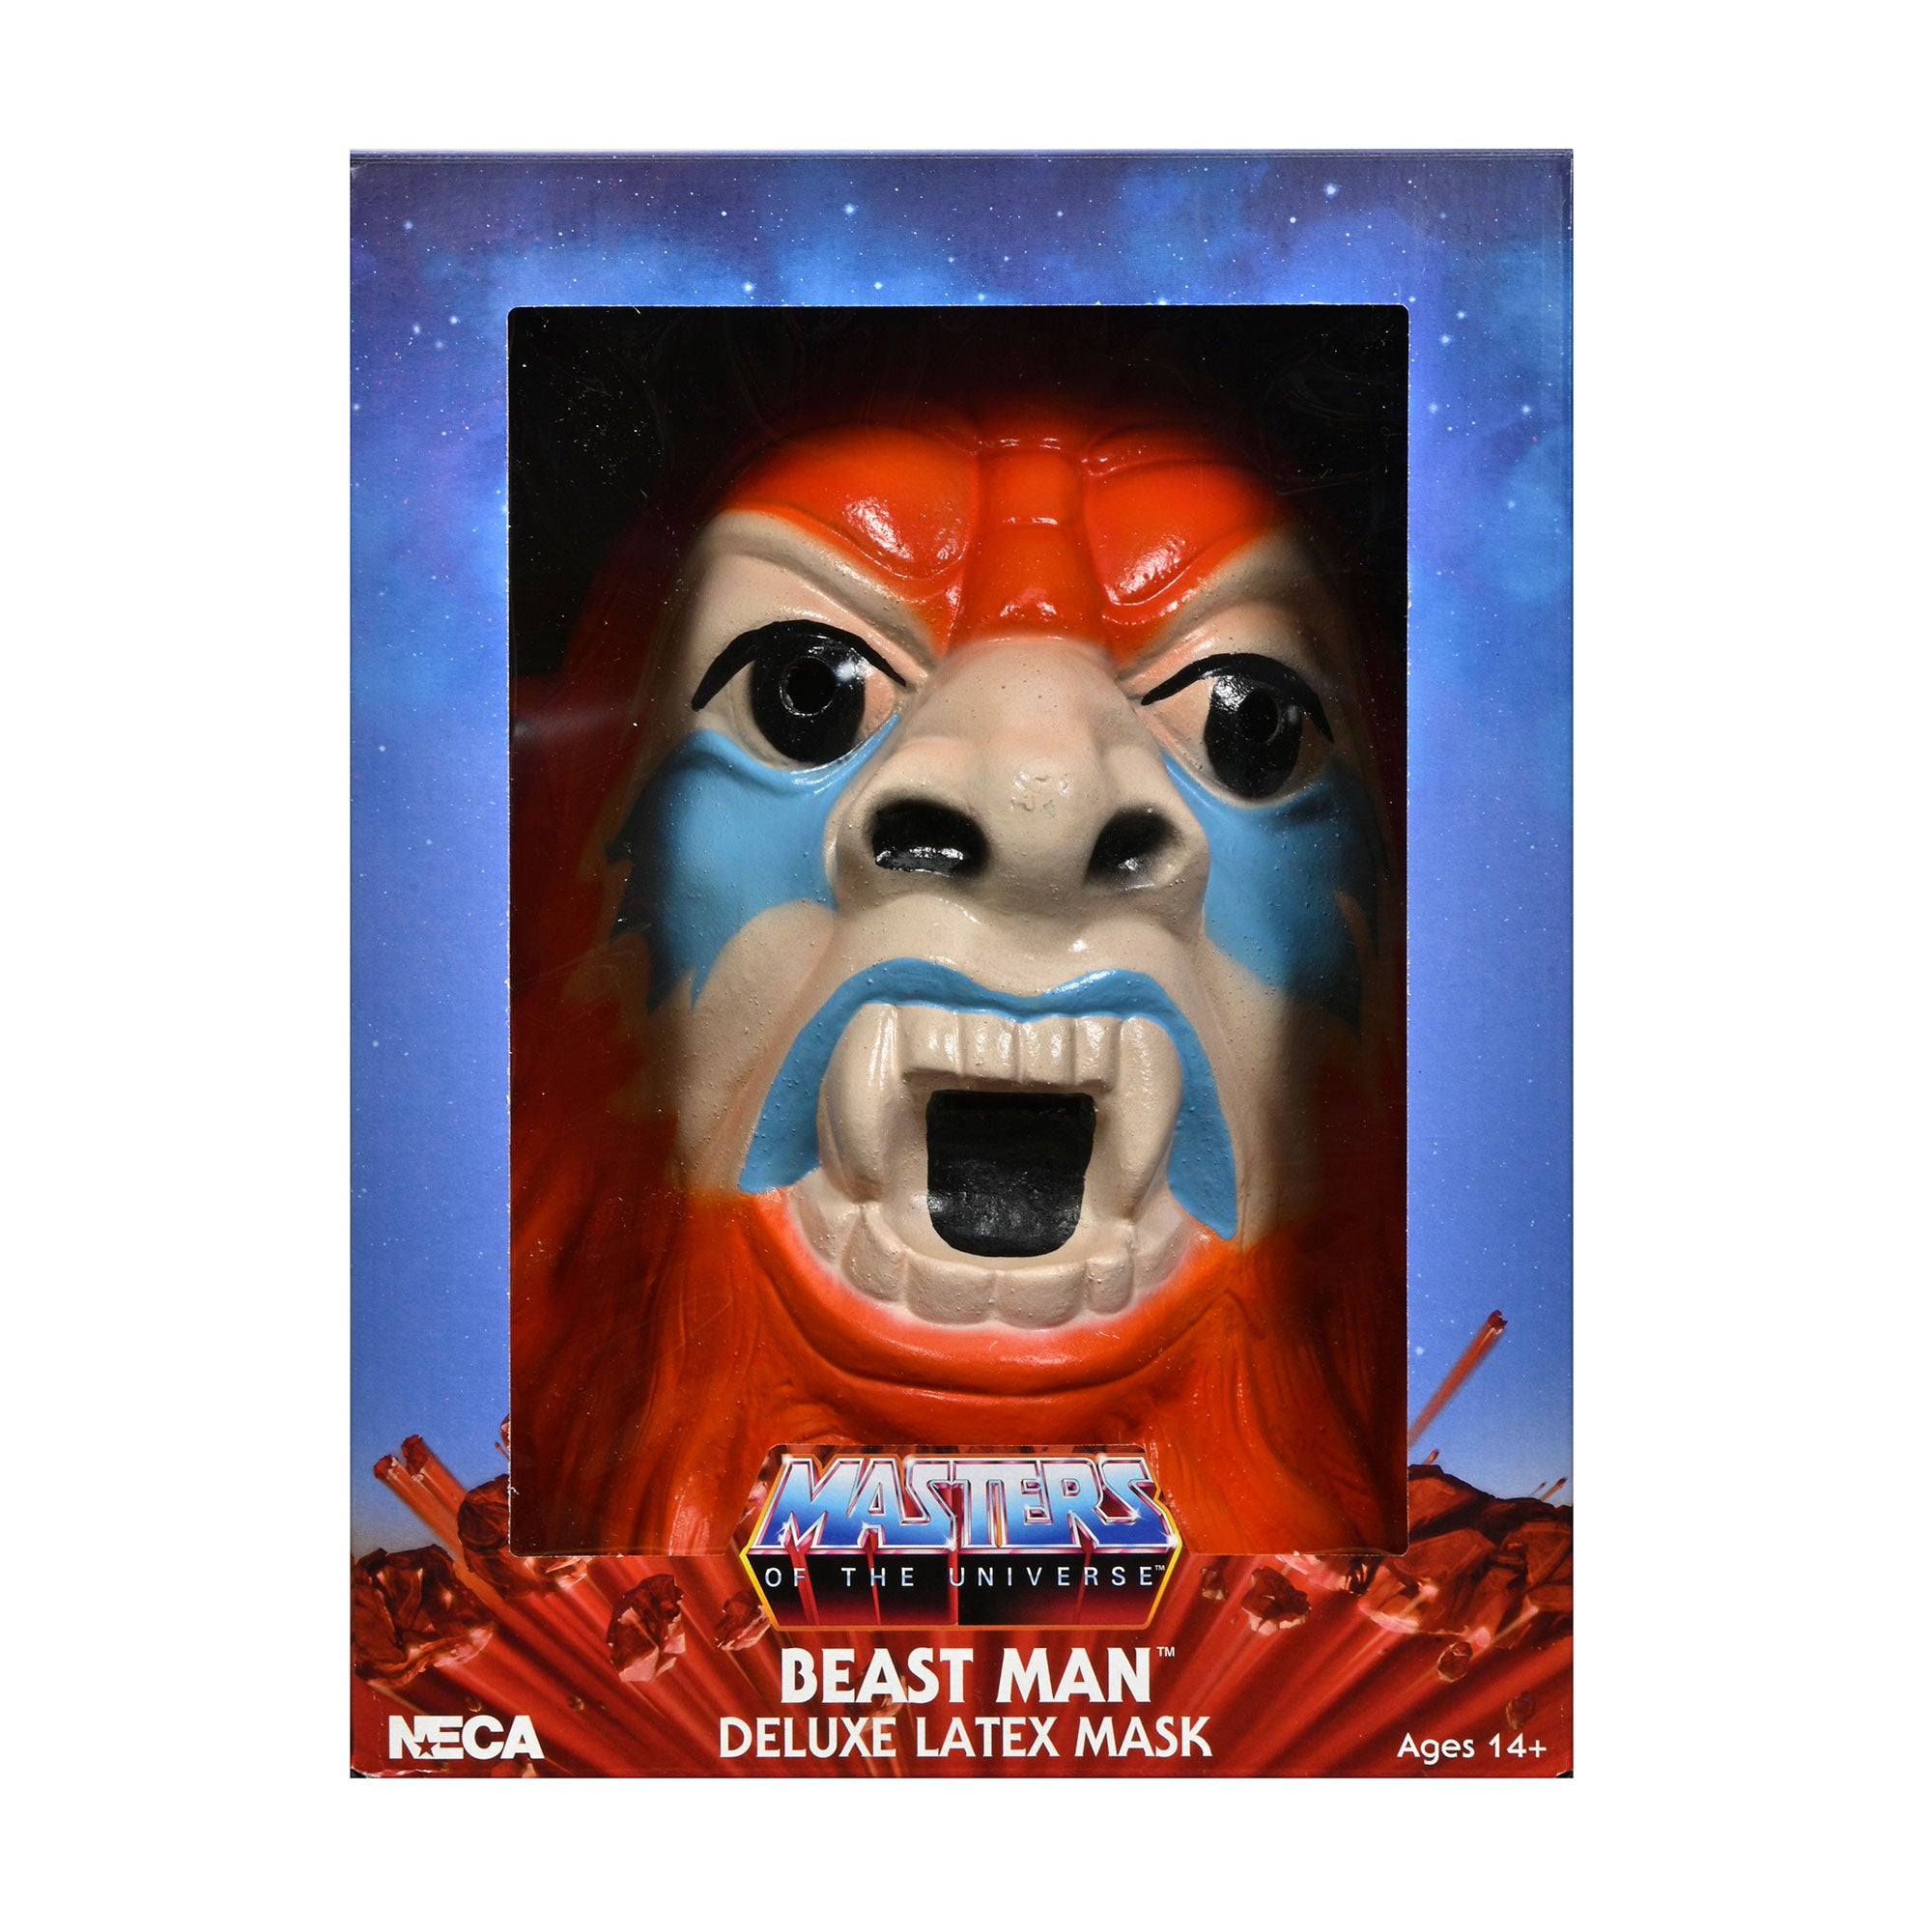 Masters of the Universe Beast Man Deluxe Latex Mask Packaging - Front of Box